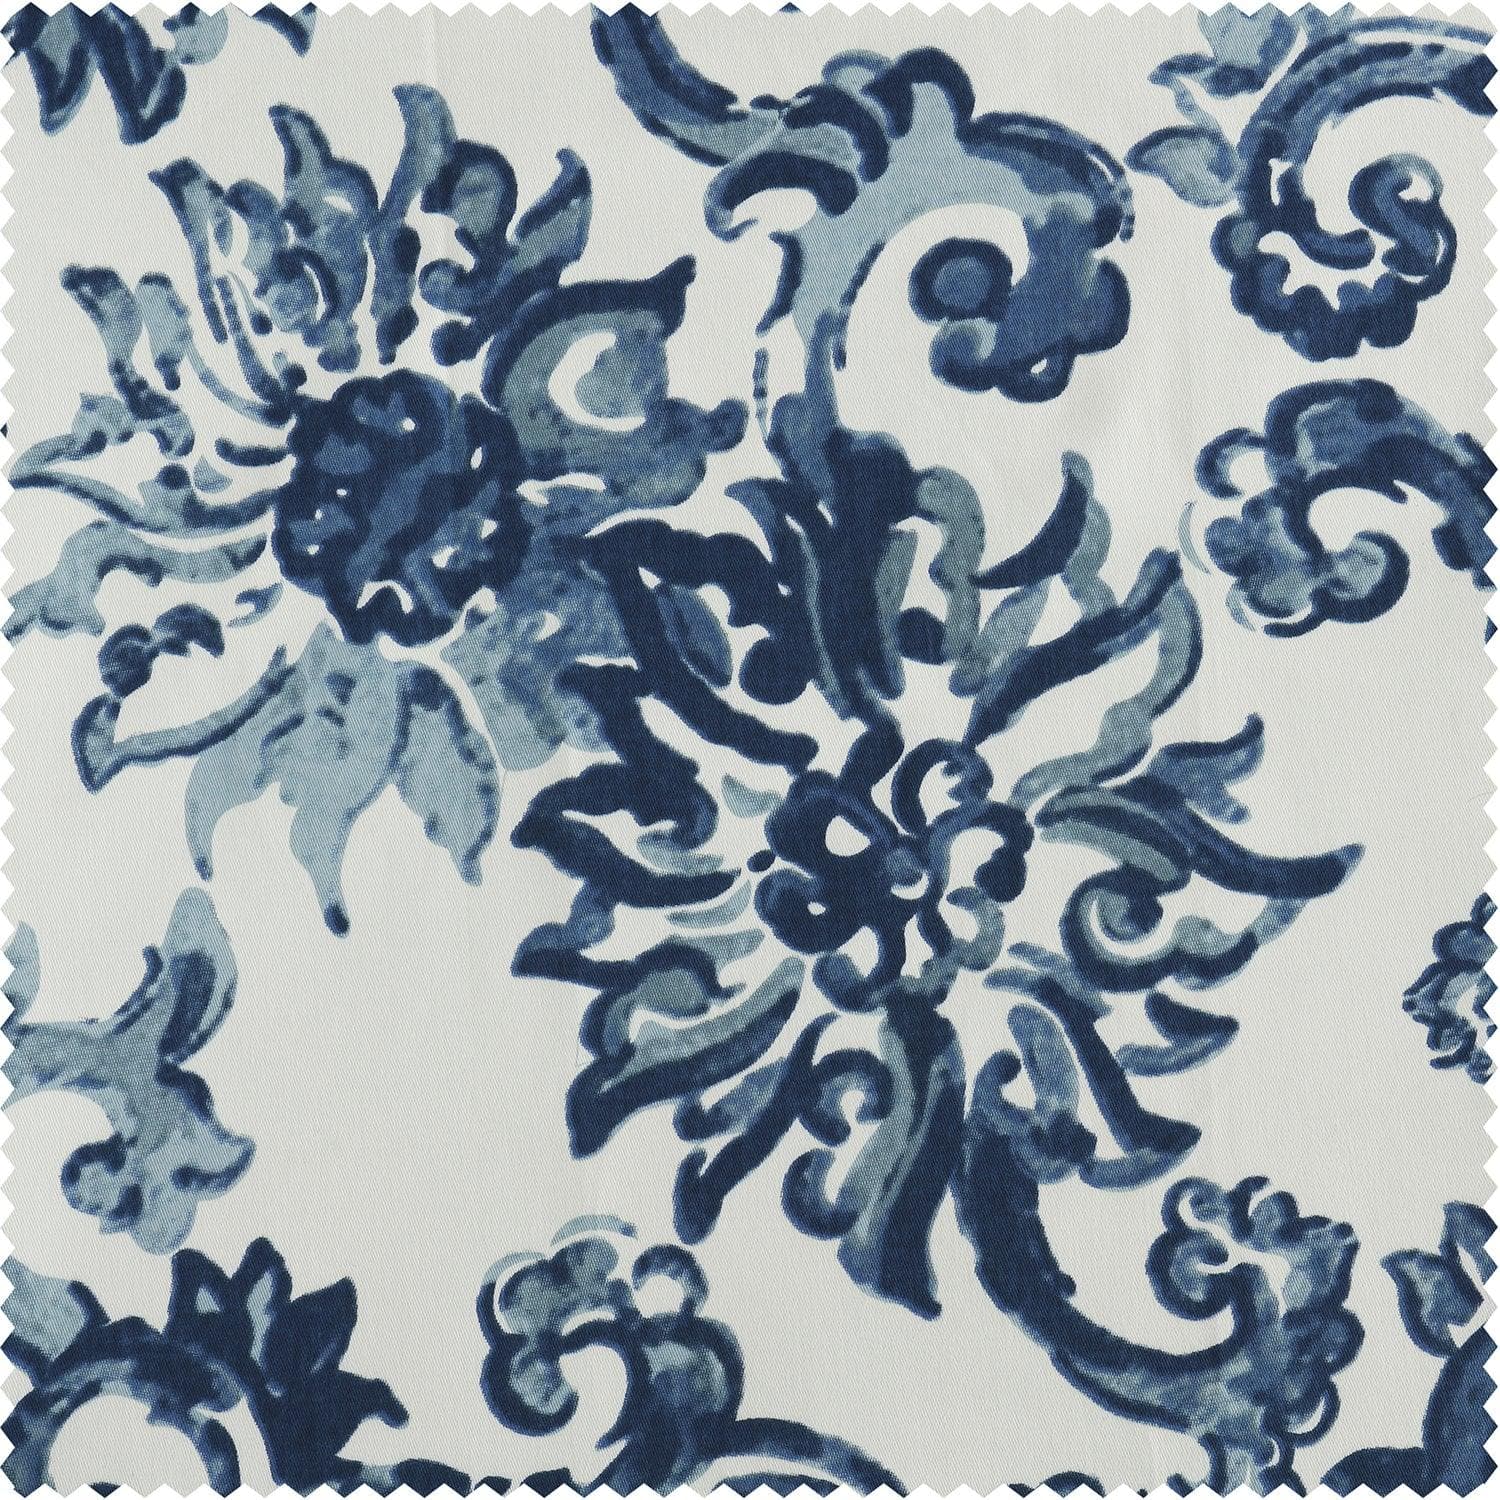 Indonesian Blue Floral Printed Cotton Room Darkening Curtain